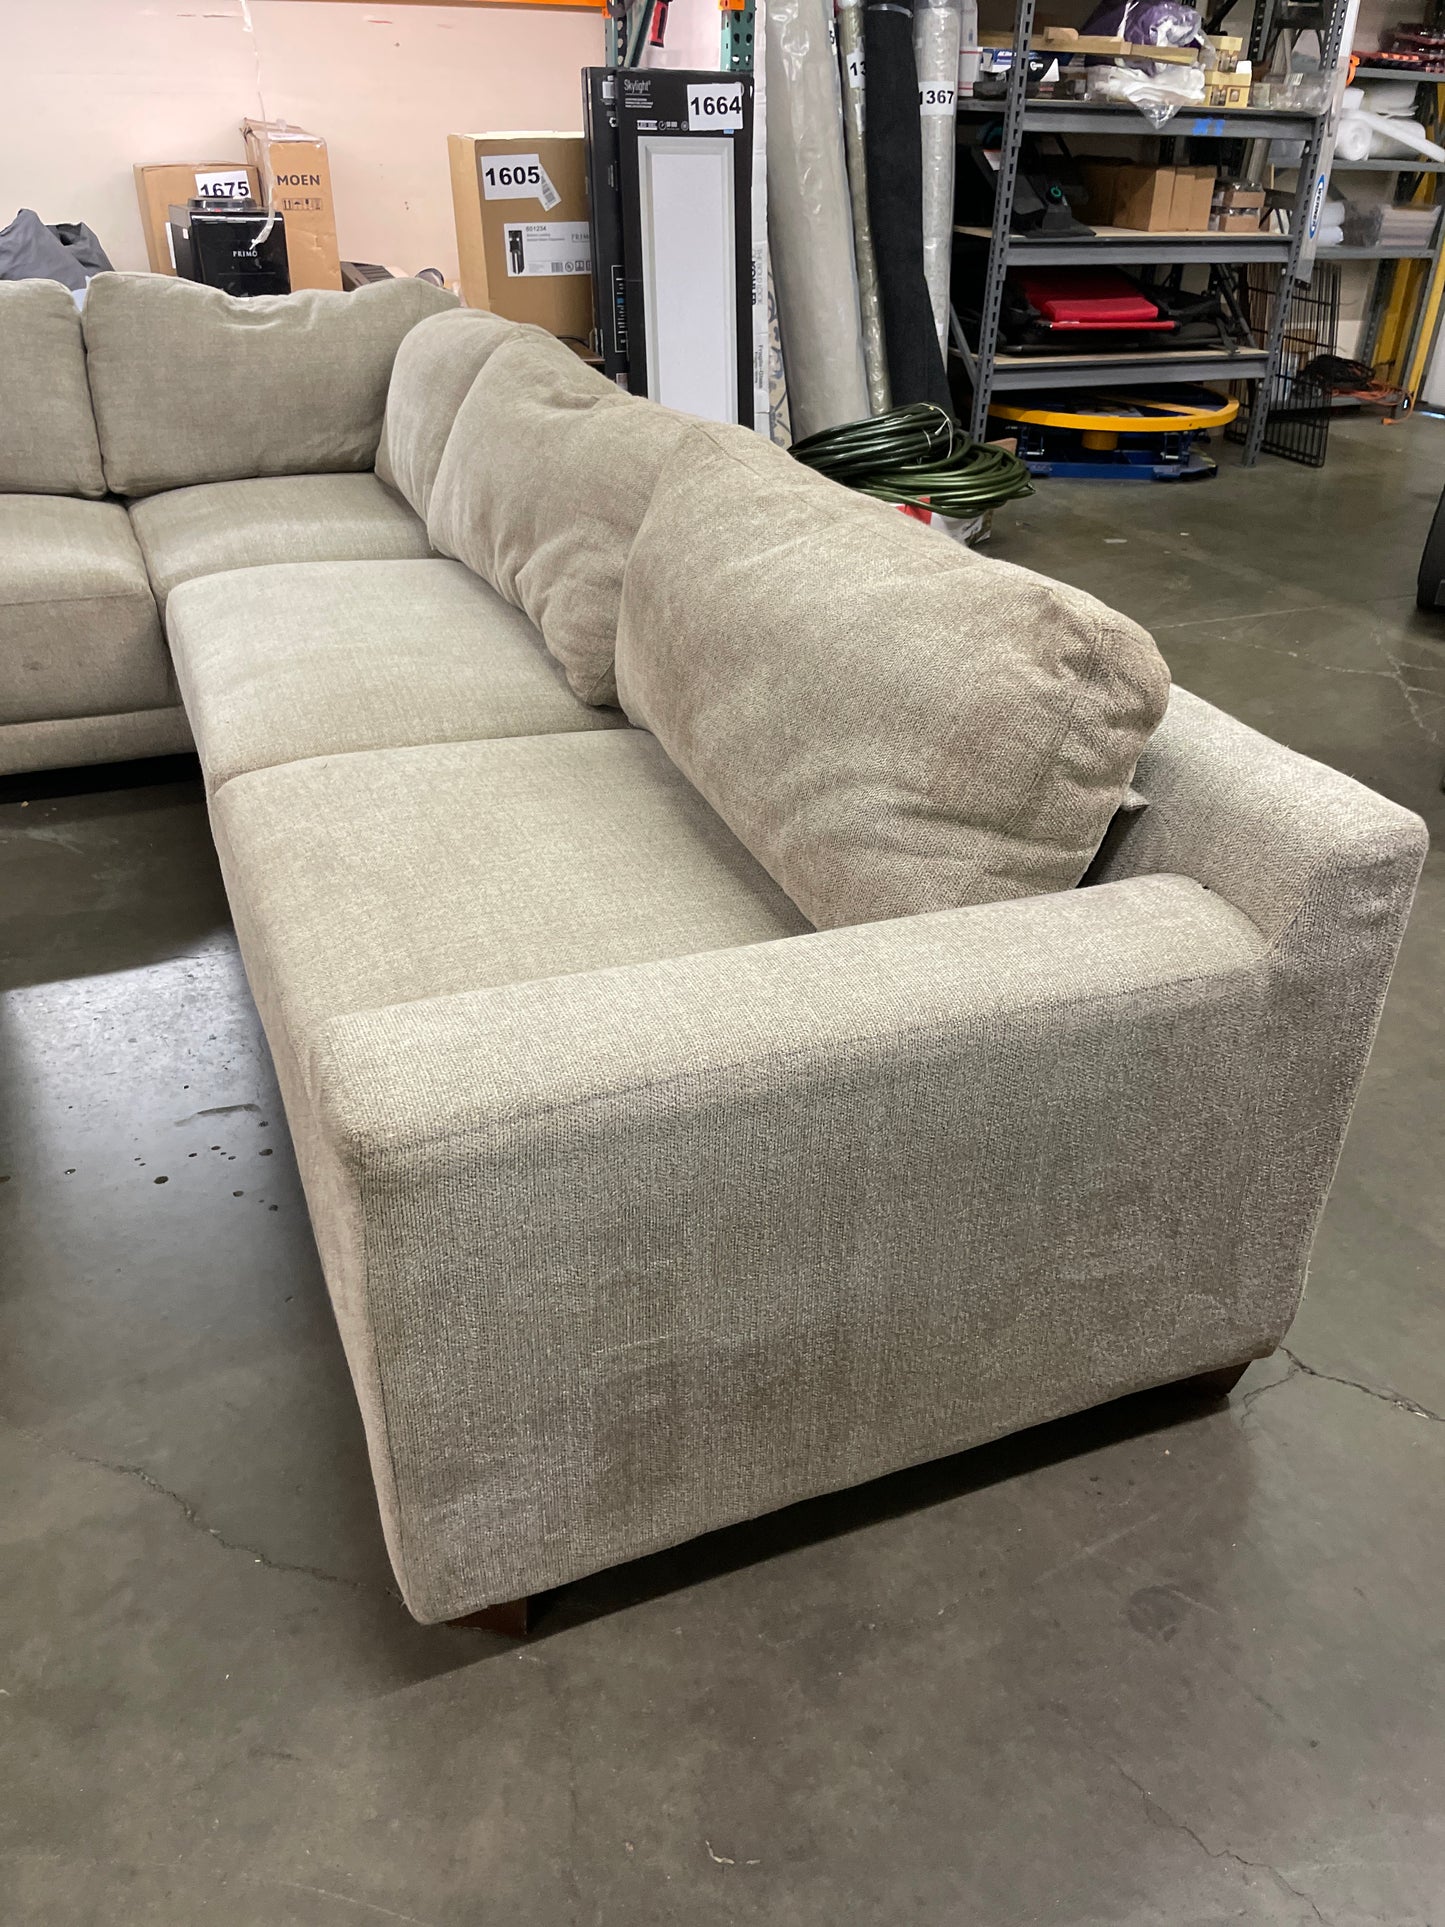 Costco - Raylin Fabric Sectional with Ottoman - Retail $1599